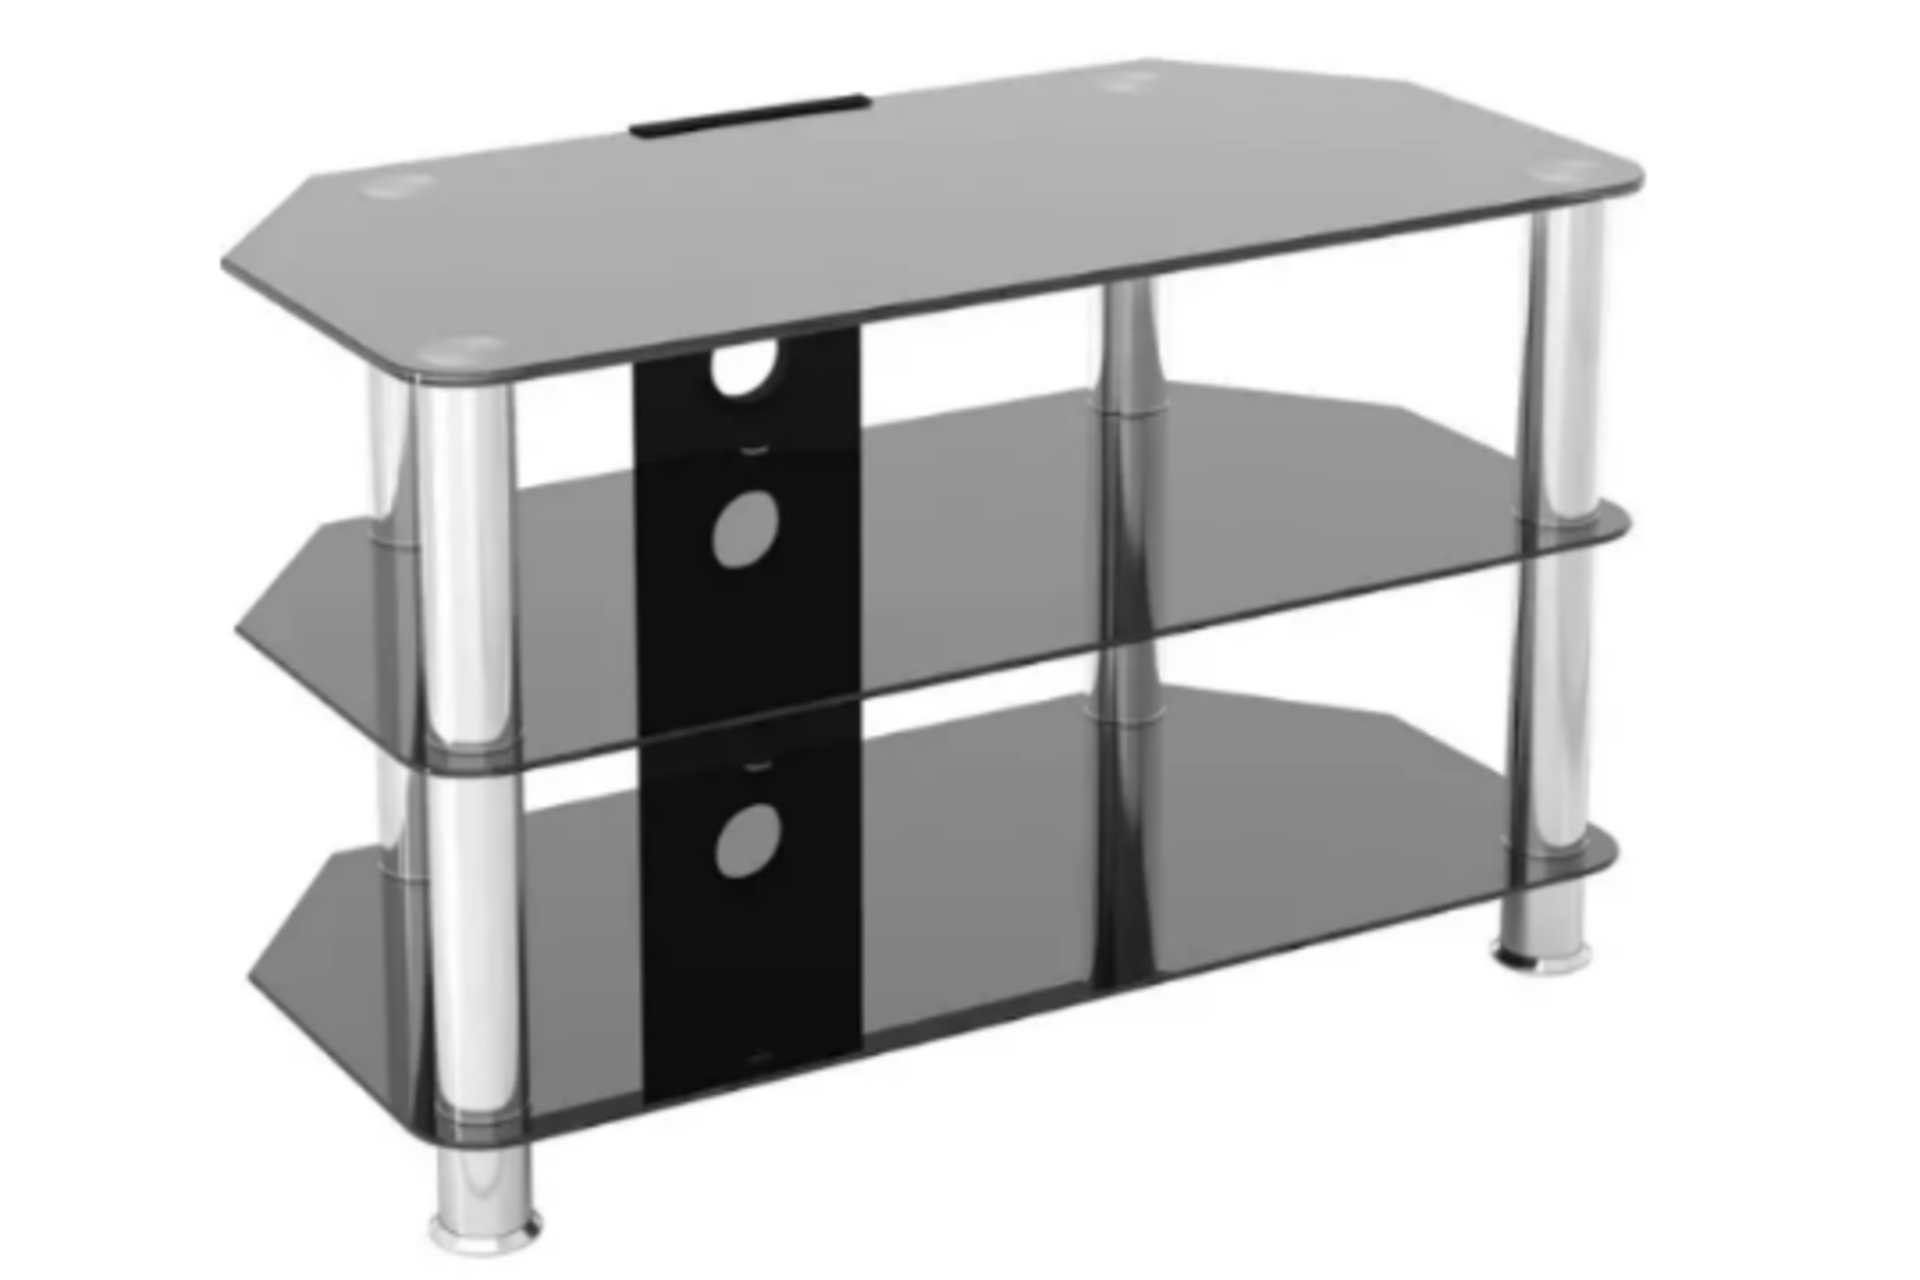 TRADE LOT 10 x NEW LIVING GLASS TV STANDS. BLACK TEMPERED GLASS WITH STAINLESS STEEL LEGS. EASY TO